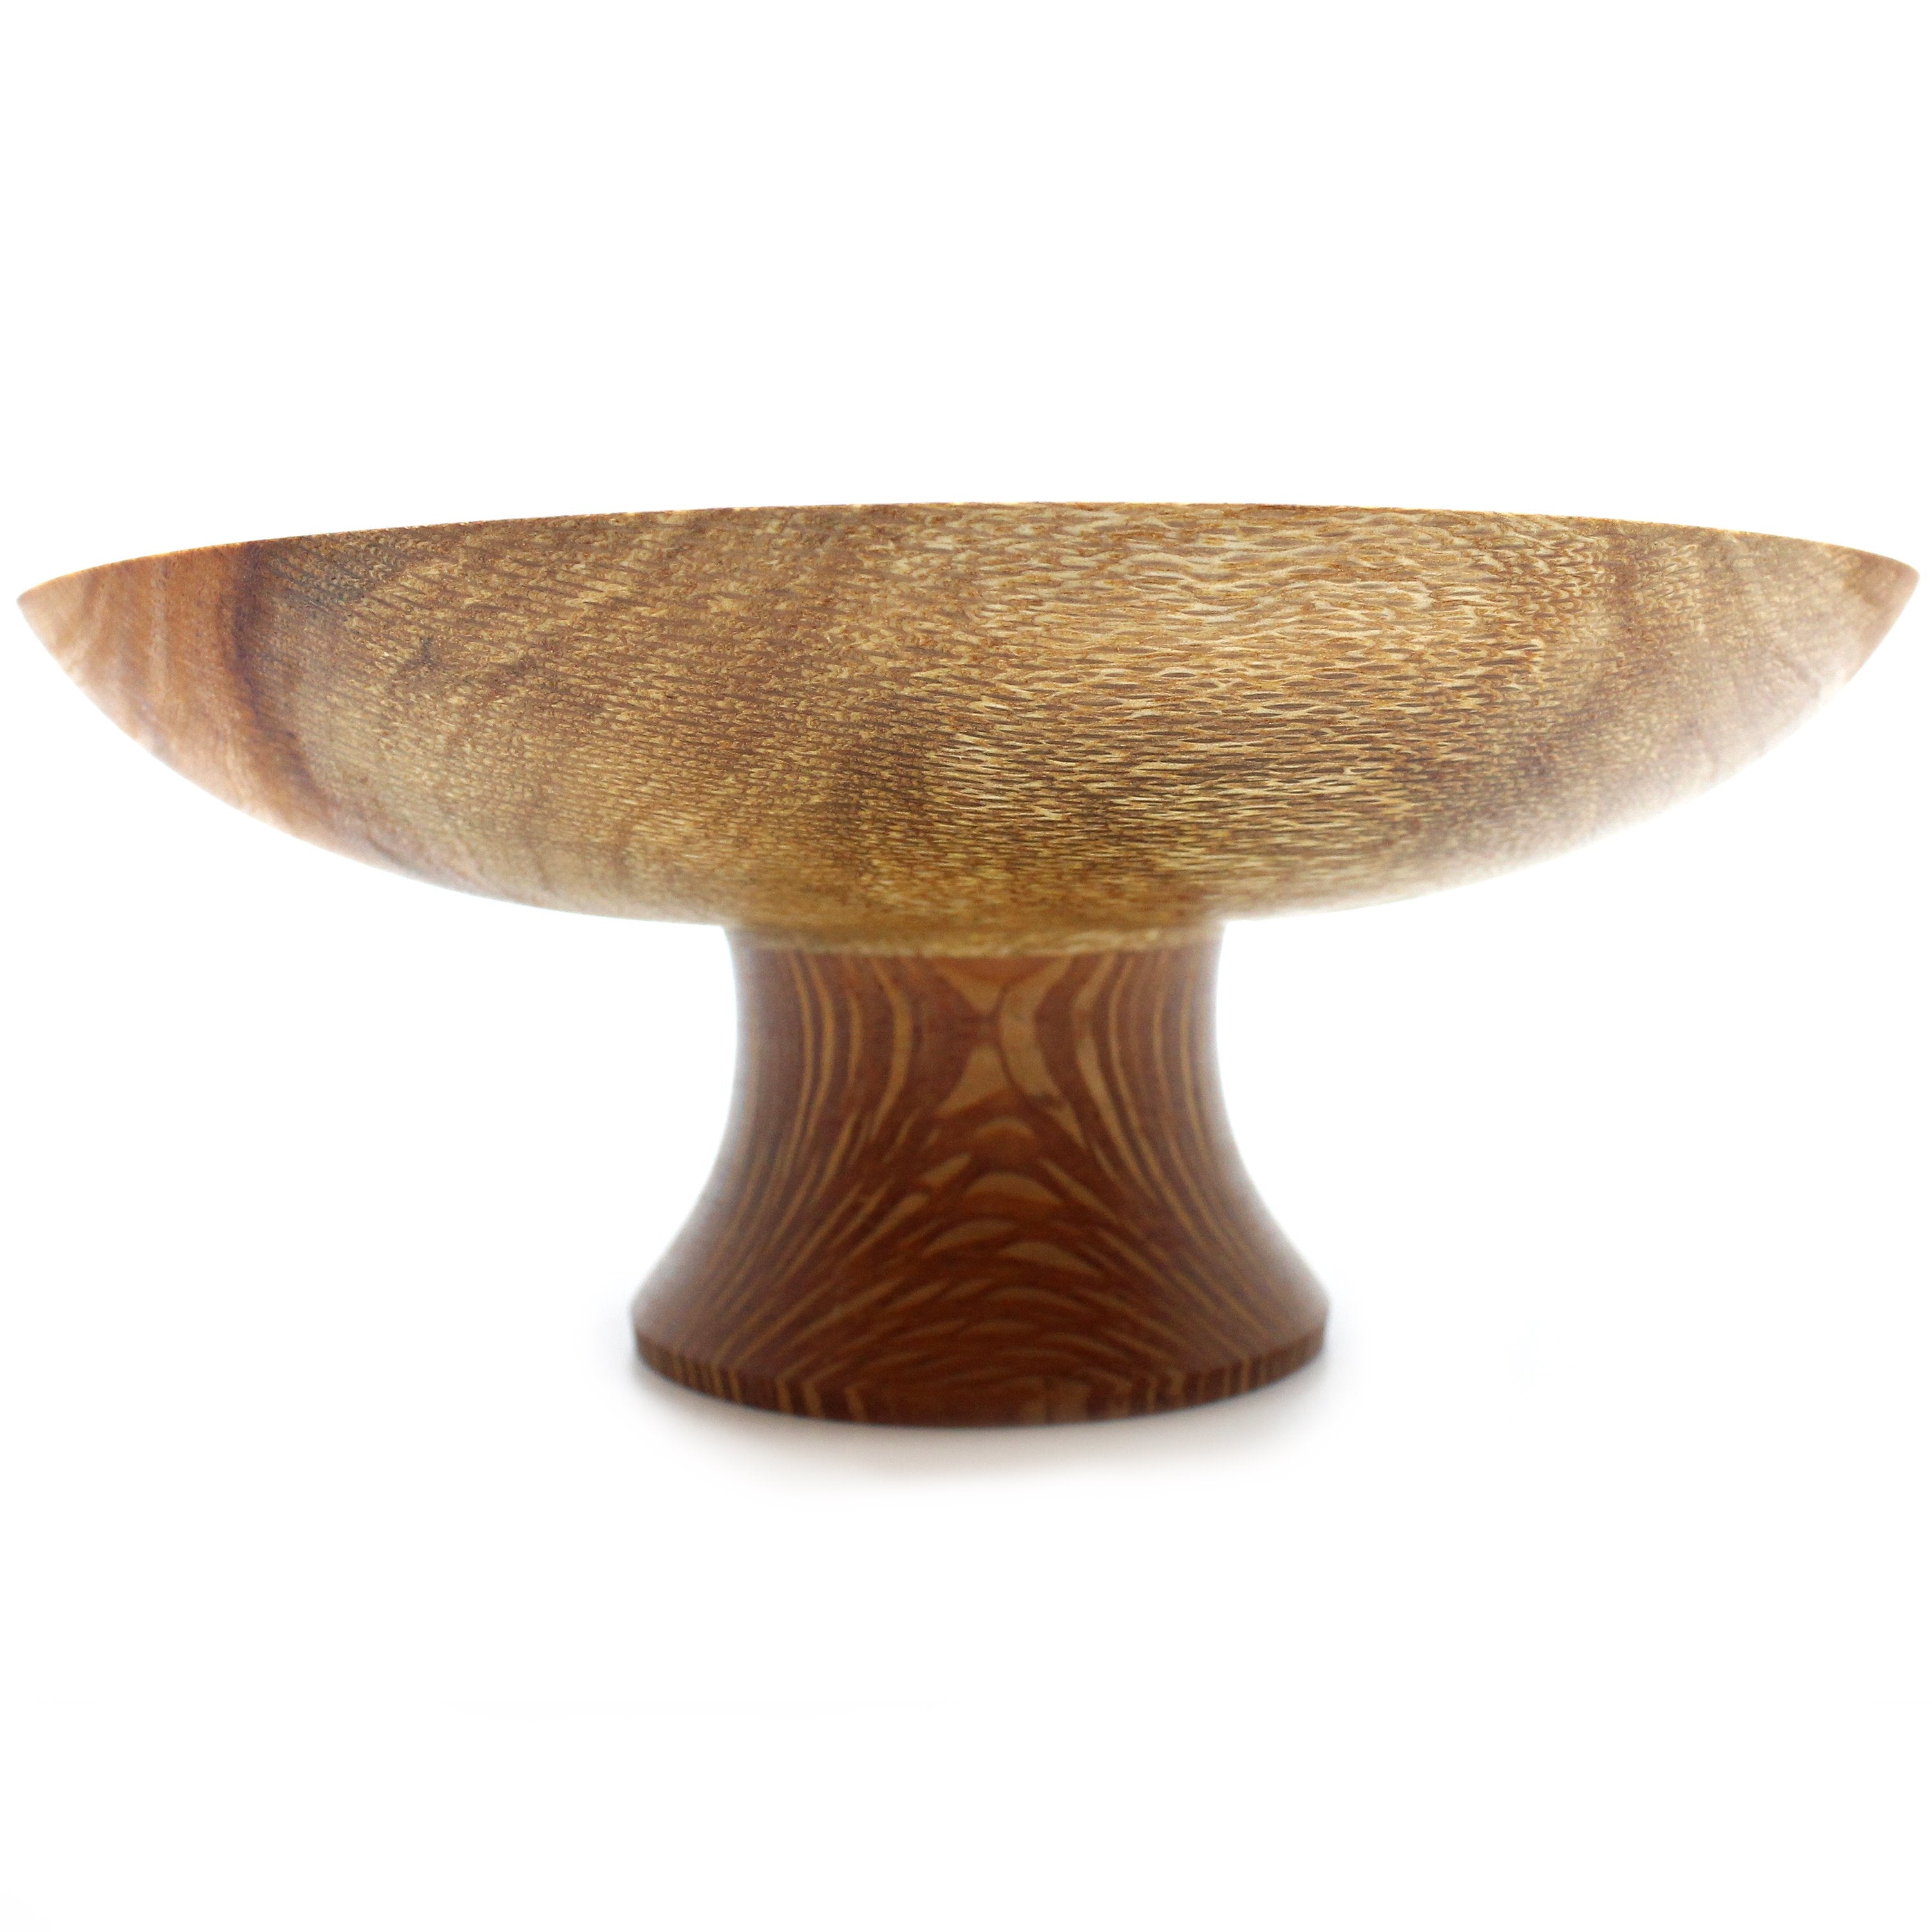 Silky Oak Footed Bowl